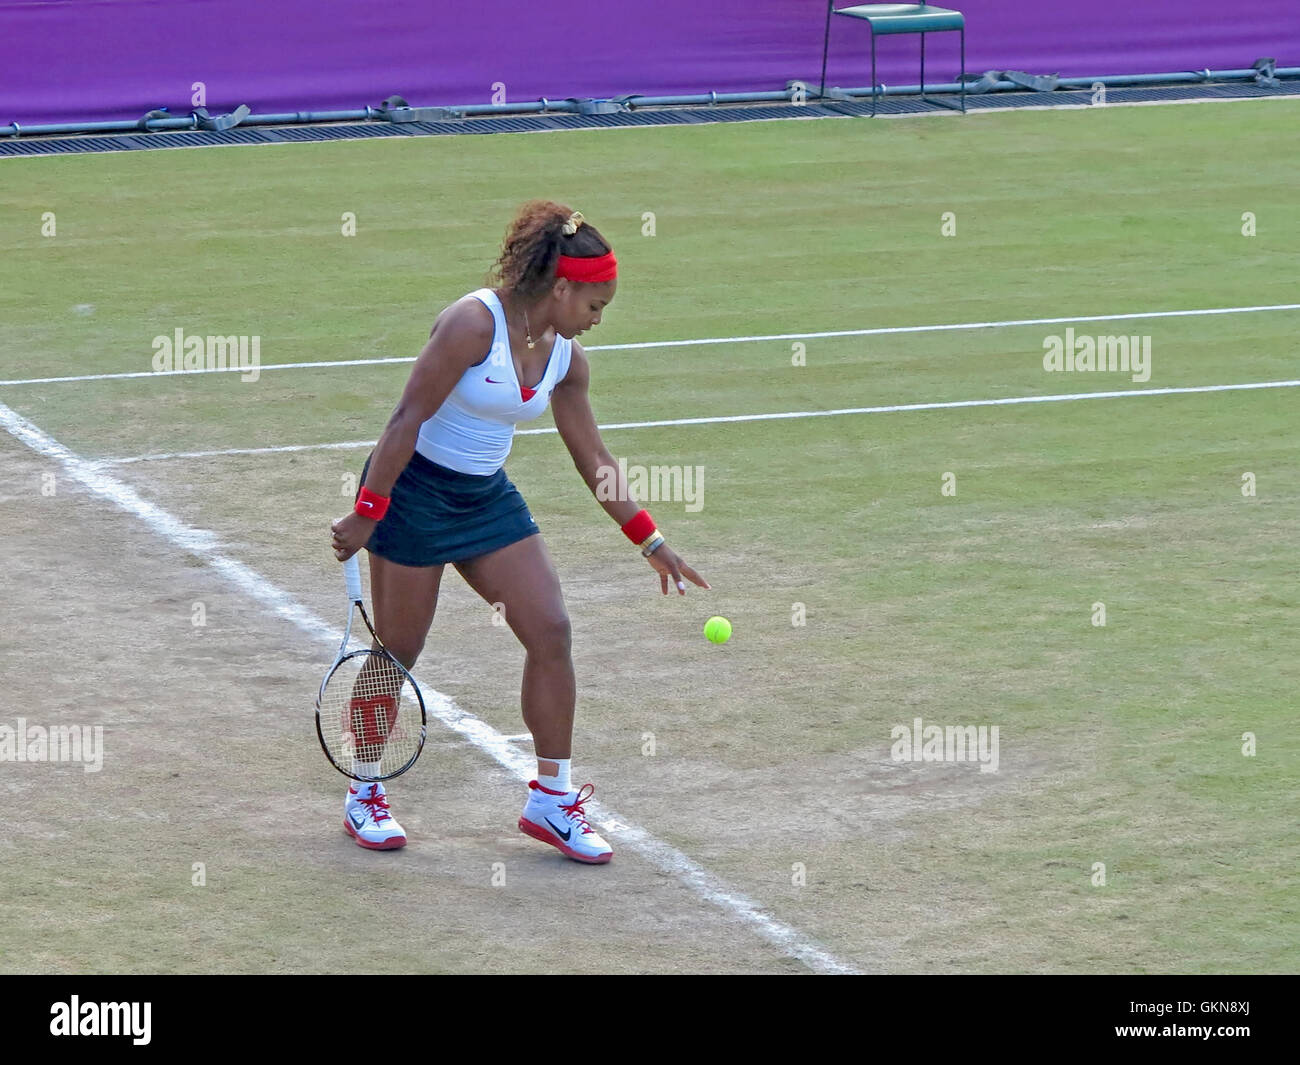 Wimbledon, England. August 2nd, 2012. Serena Williams during one of her doubles matches at the summer Olympics in London in 2012 Stock Photo